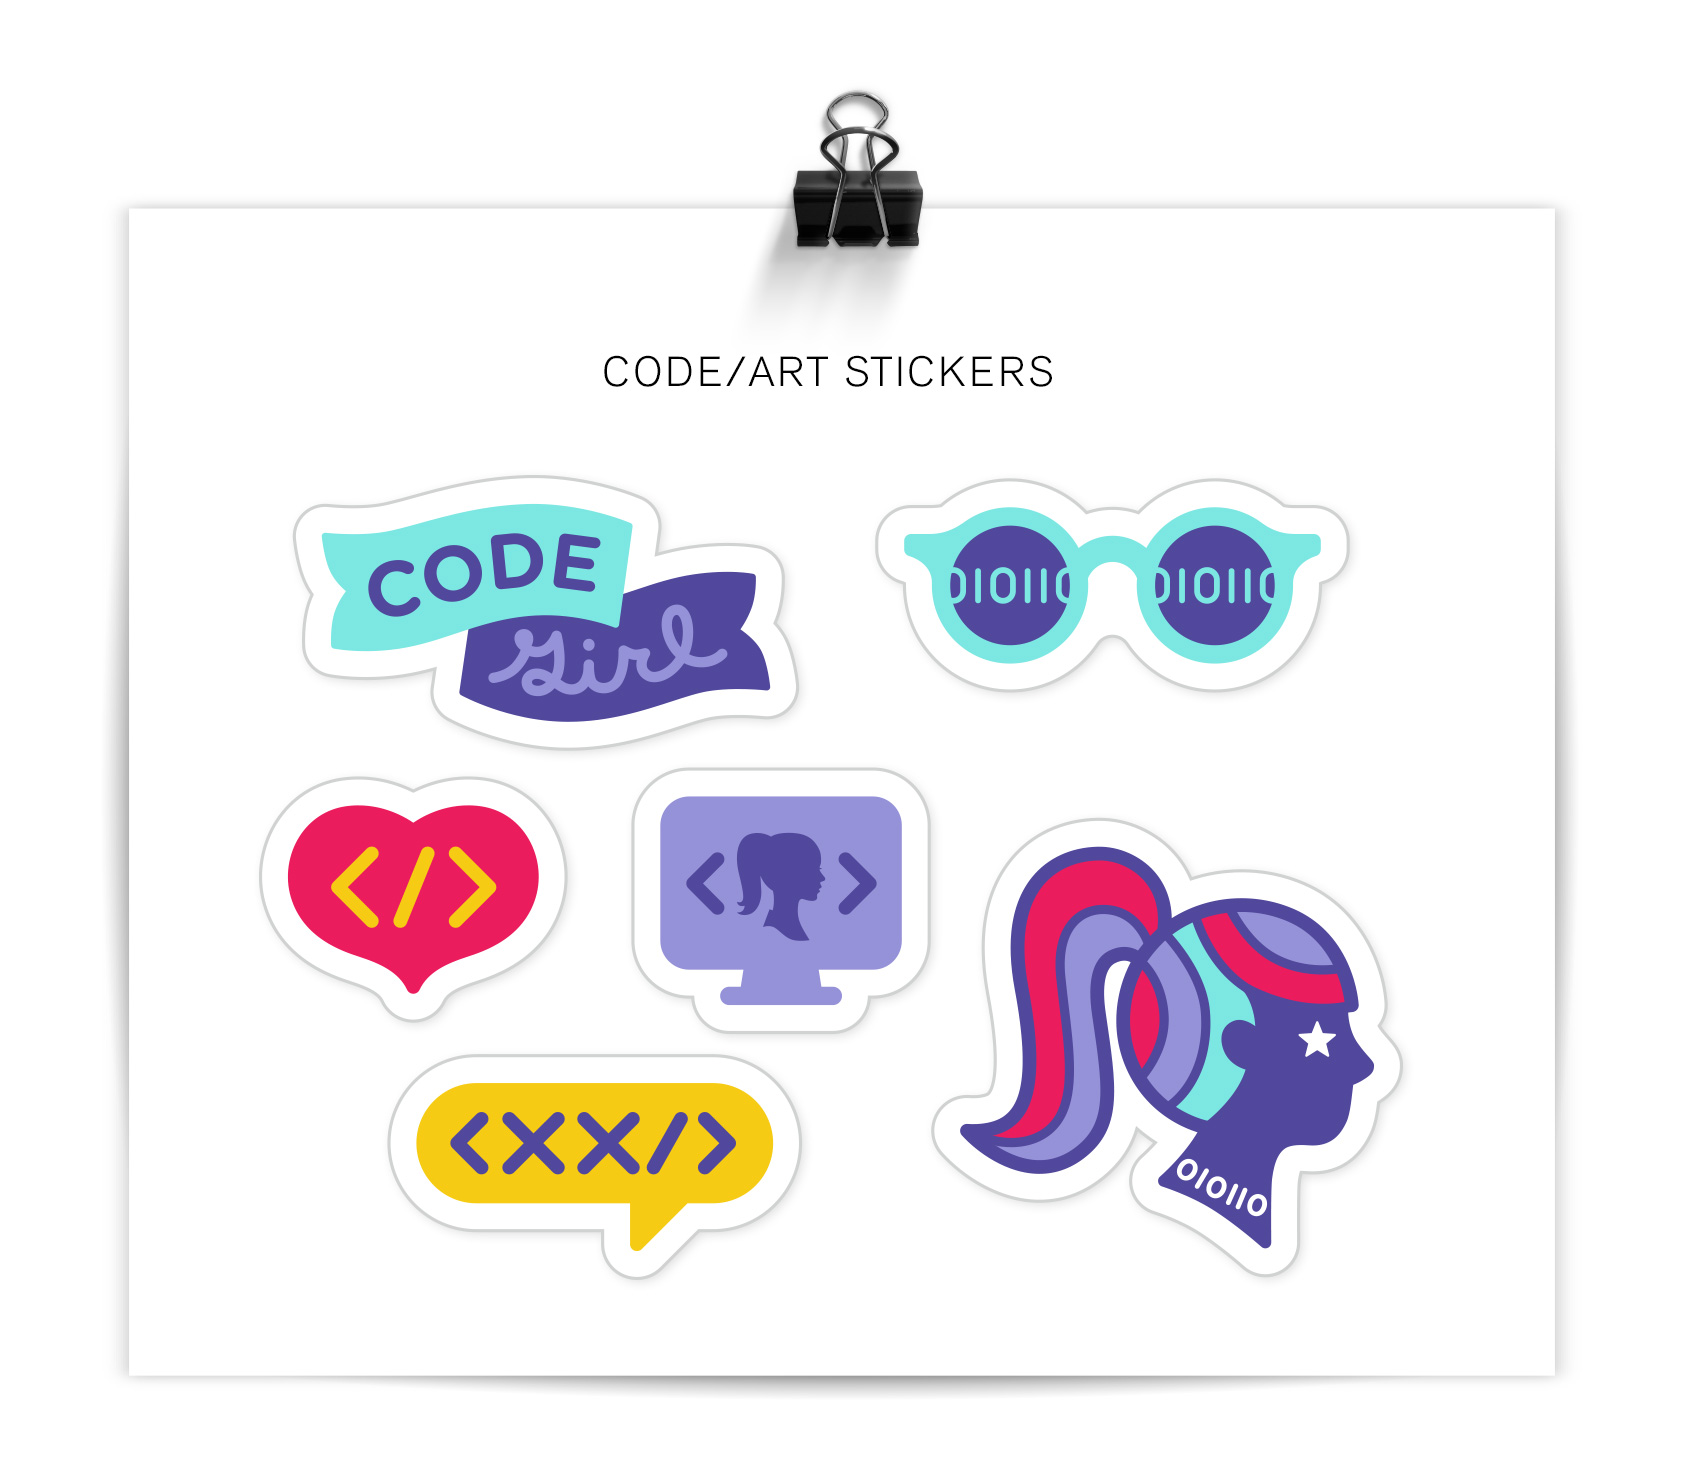 stickers for code/art girls including "code girl" banner, code sunglasses, </> heart, <xx/> and code girl brooch